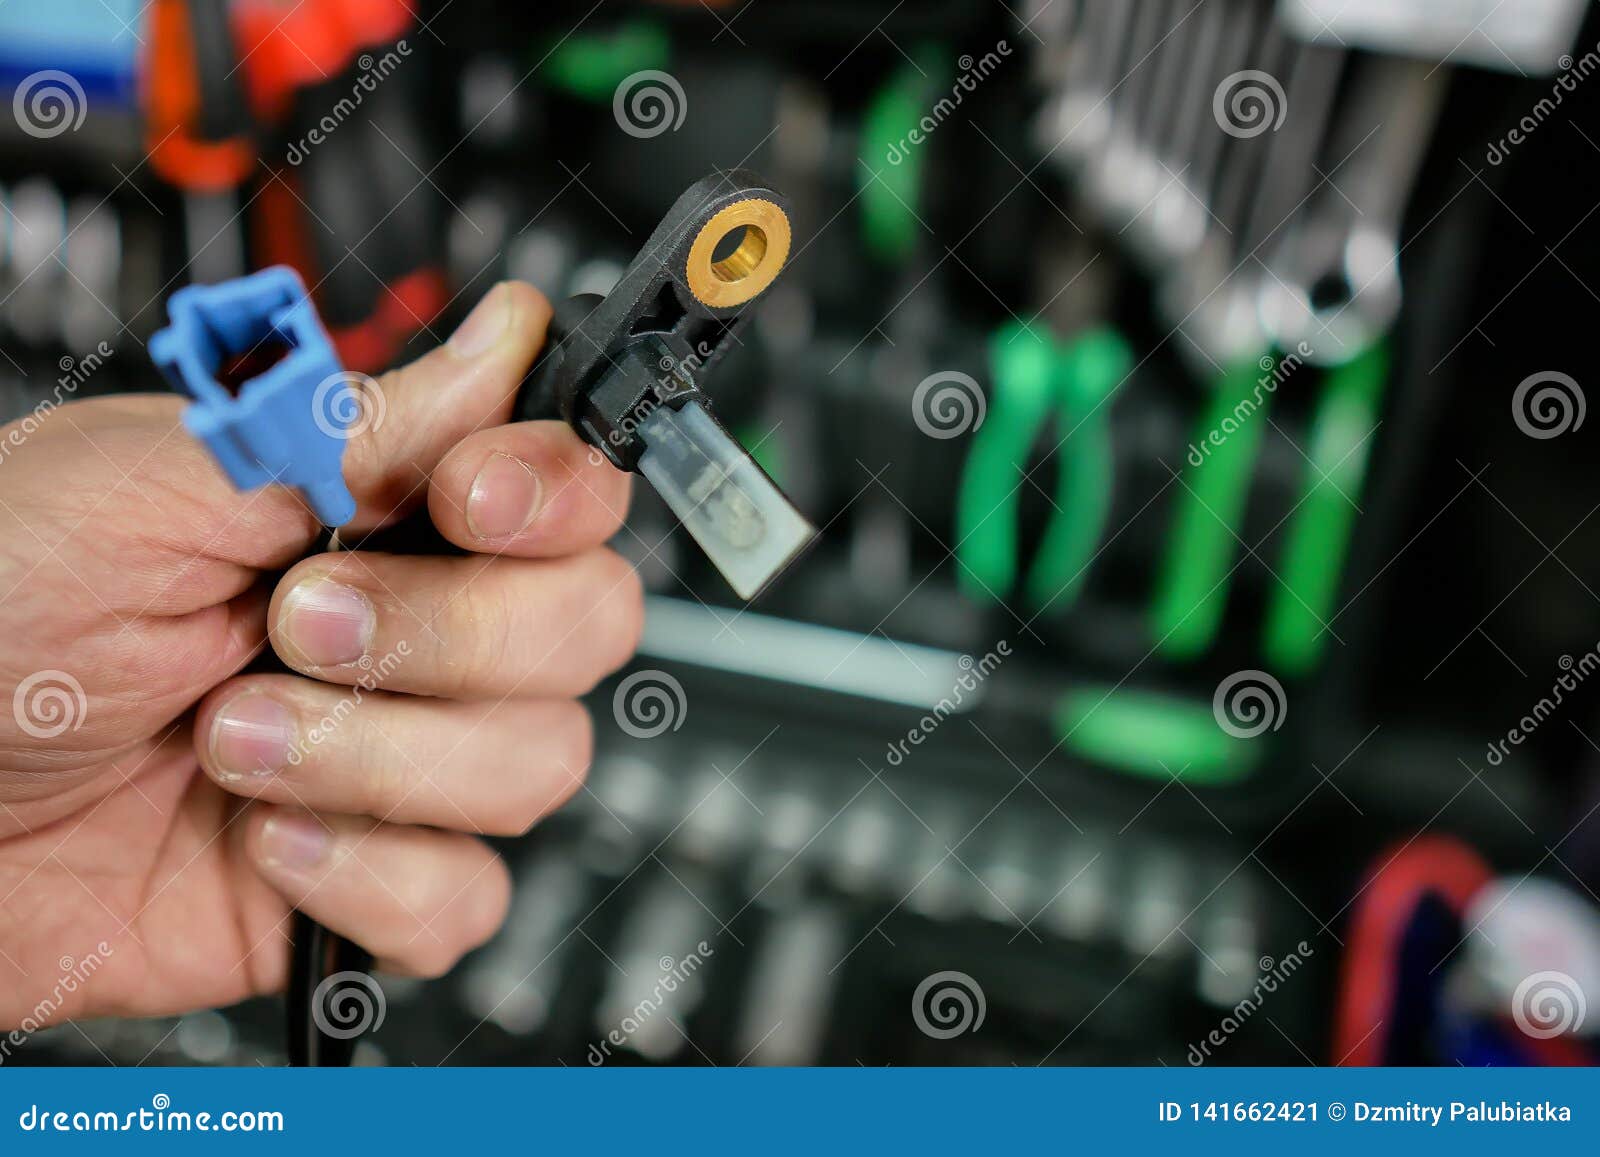 abs sensor in the hands of an auto mechanic.